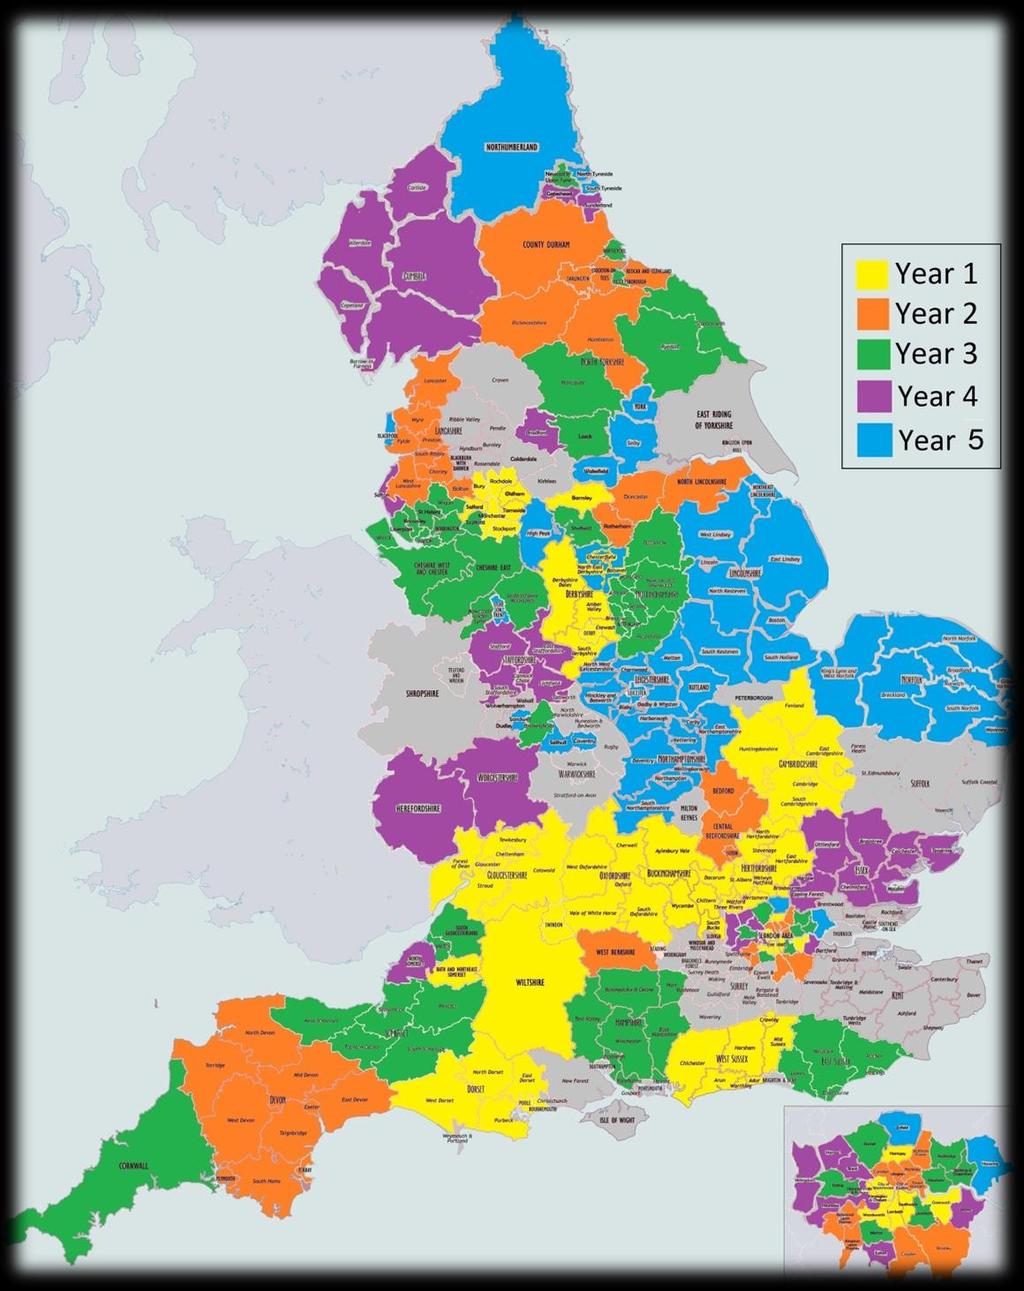 CYP IAPT Partnerships Map Following recruitment of 6 th collaborative, programme on target to work with services covering 80% of 0-19 population by